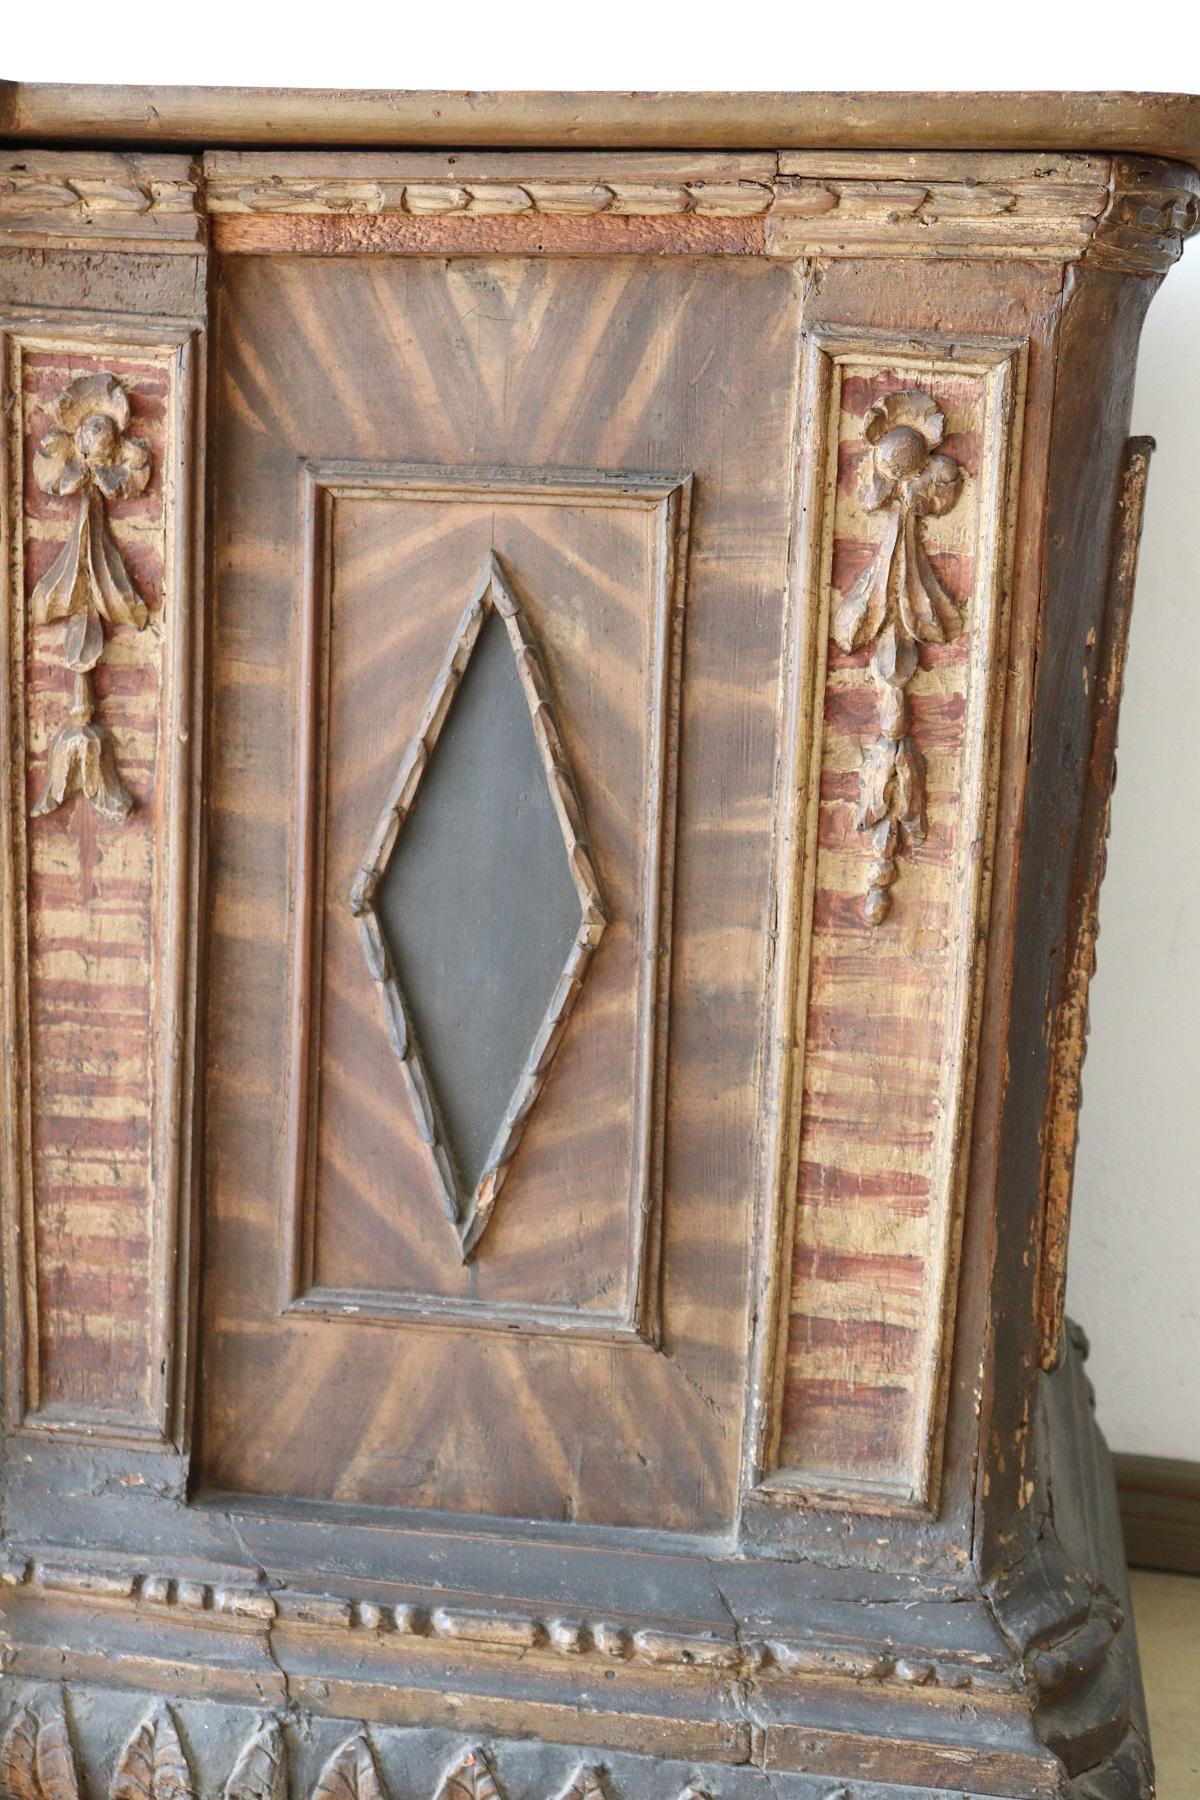 Late 16th Century Painting Wood Church Altar 1